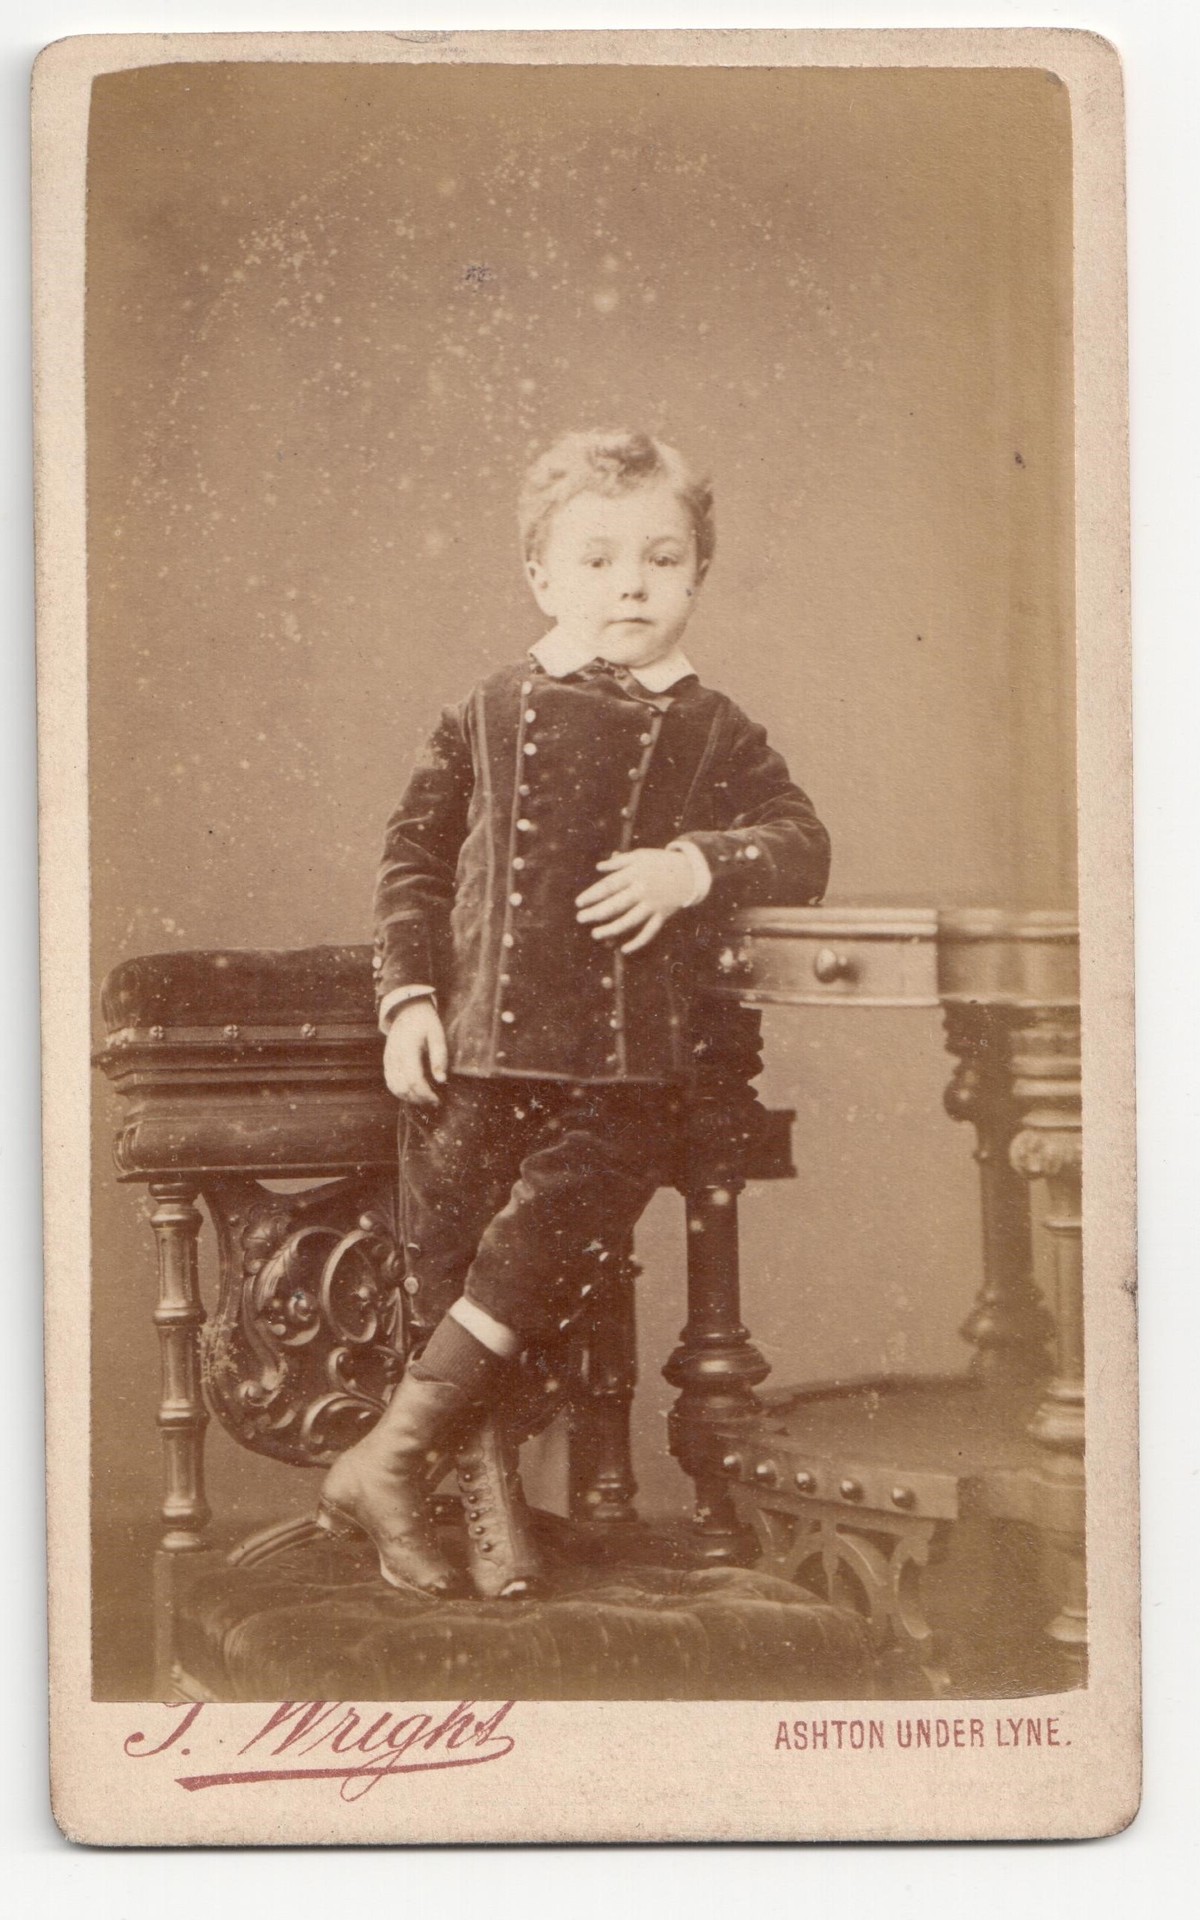 Young boy wearing velvet jacket and trousers (England; 1880's; TRC 2018.3394).